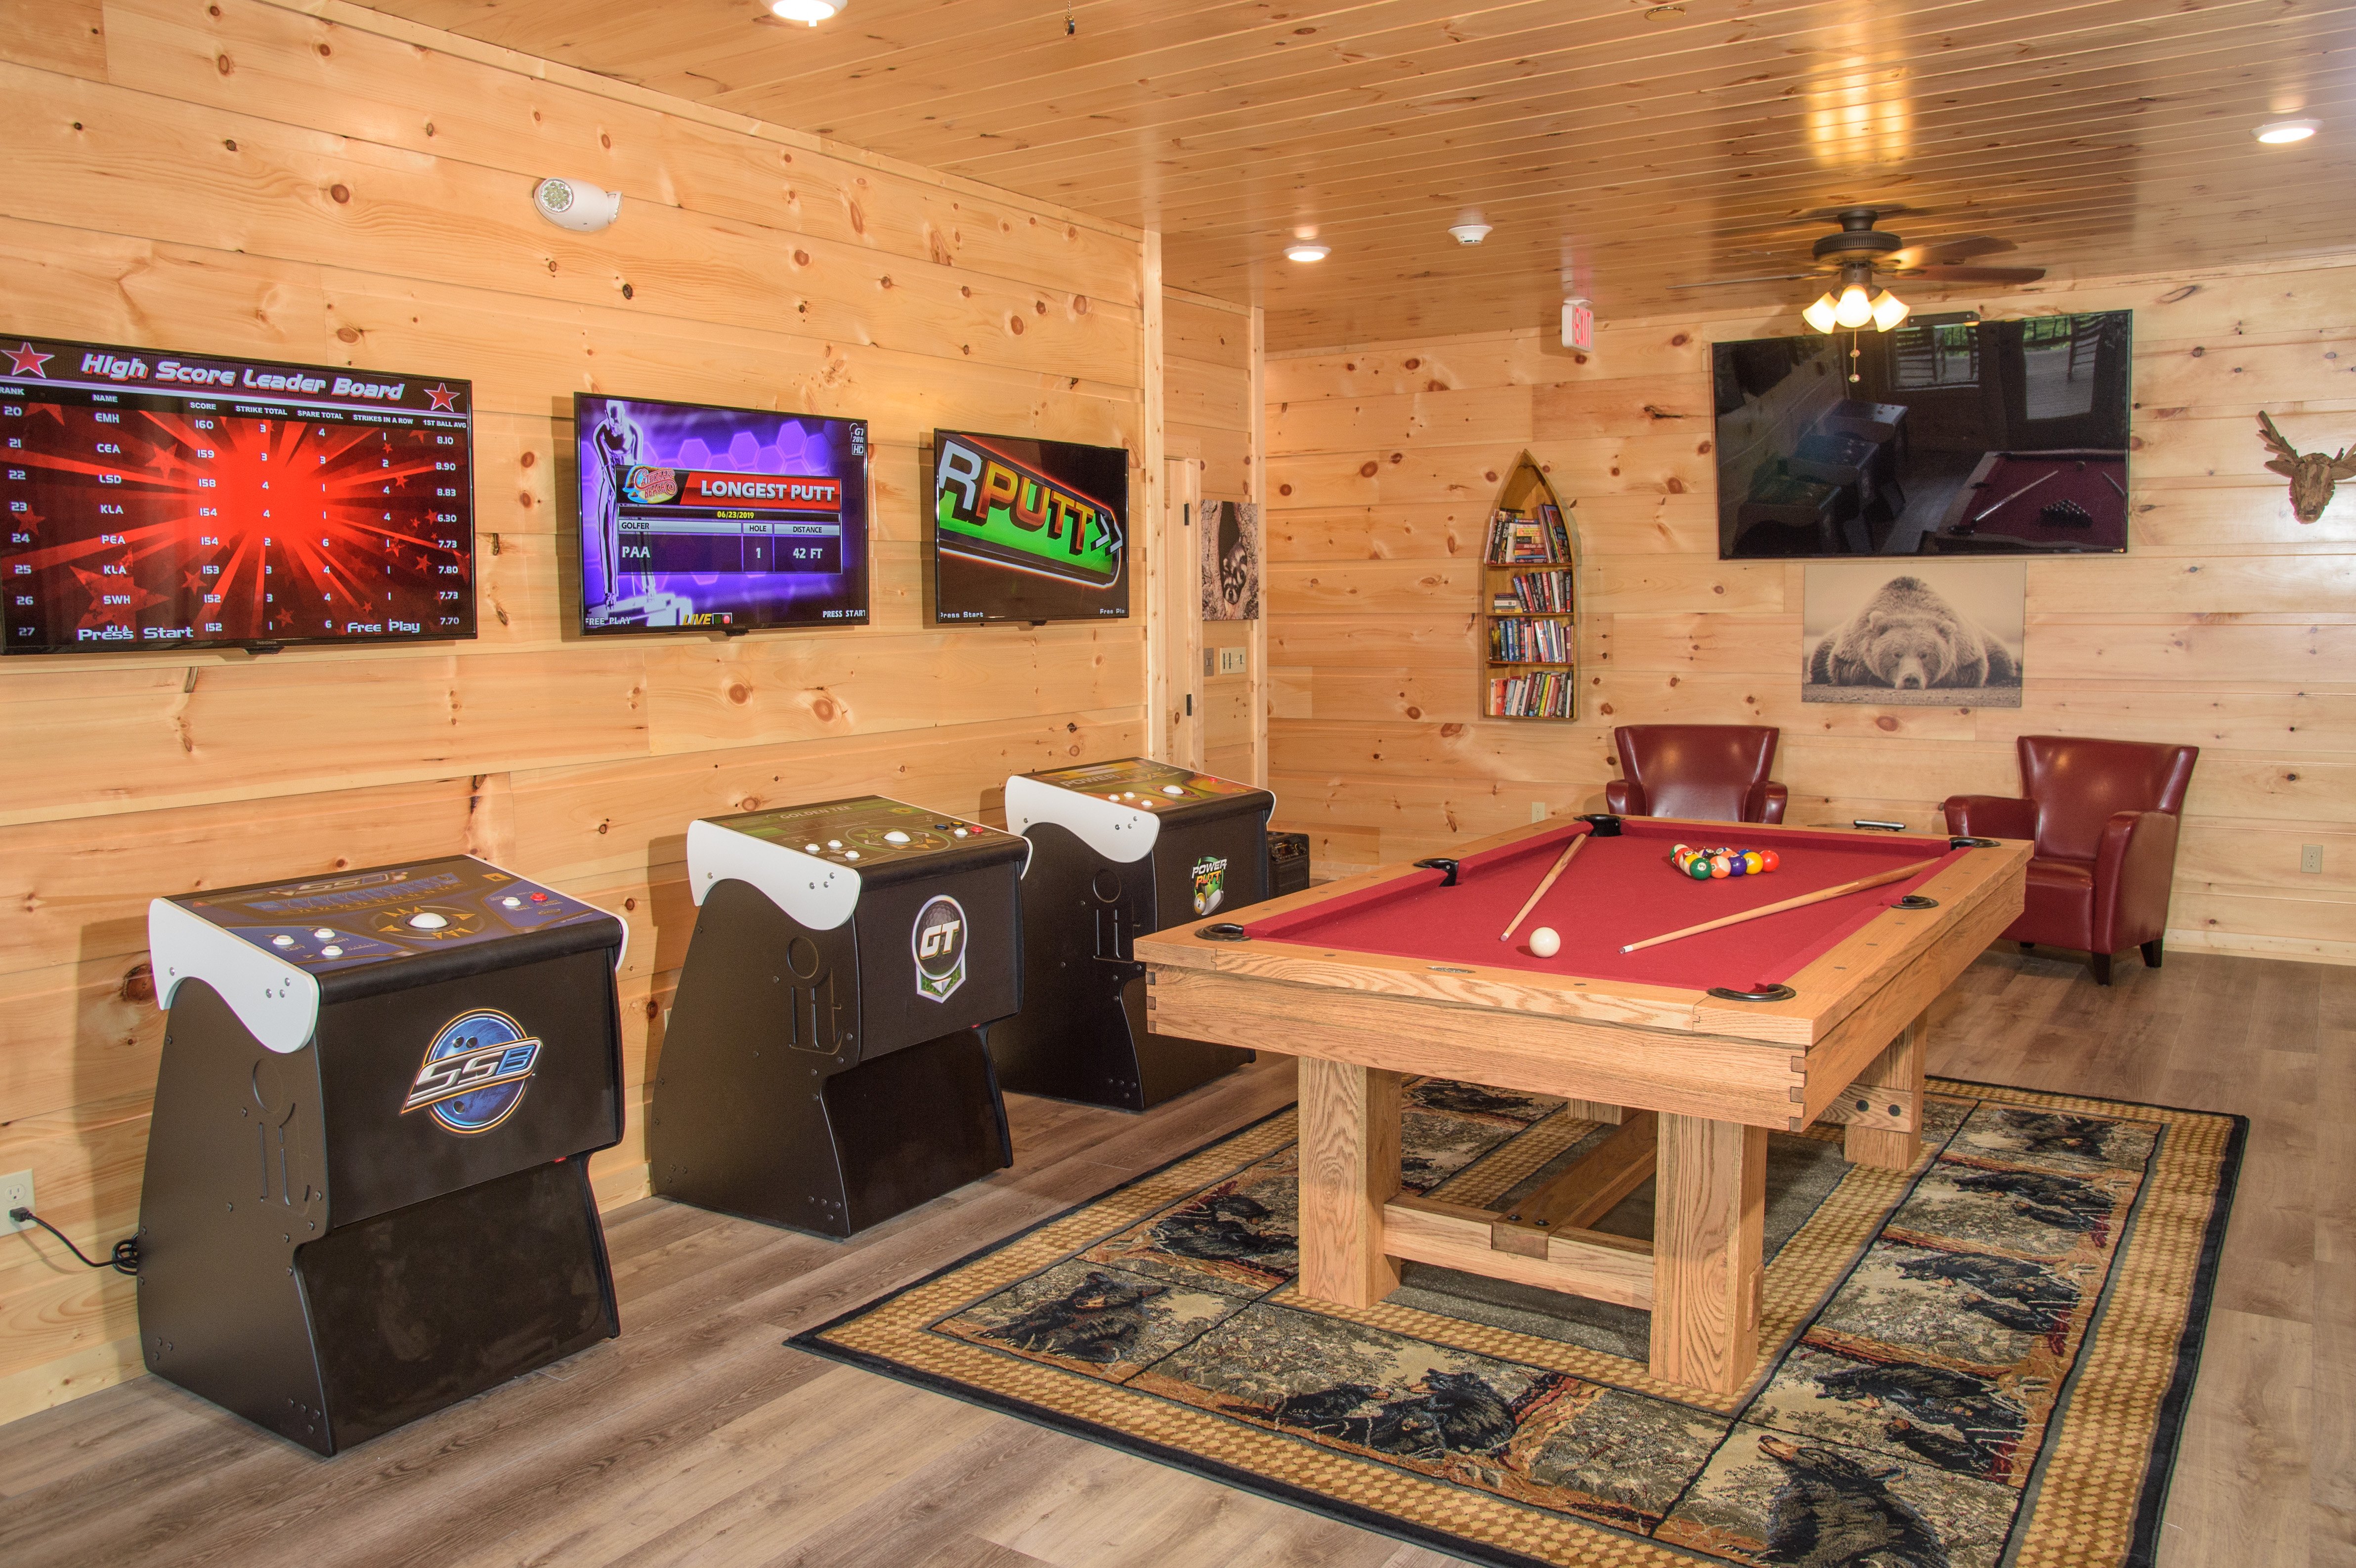 1 of 2 Game Rooms with Pool, Arcade Games, & Flat Screen TV